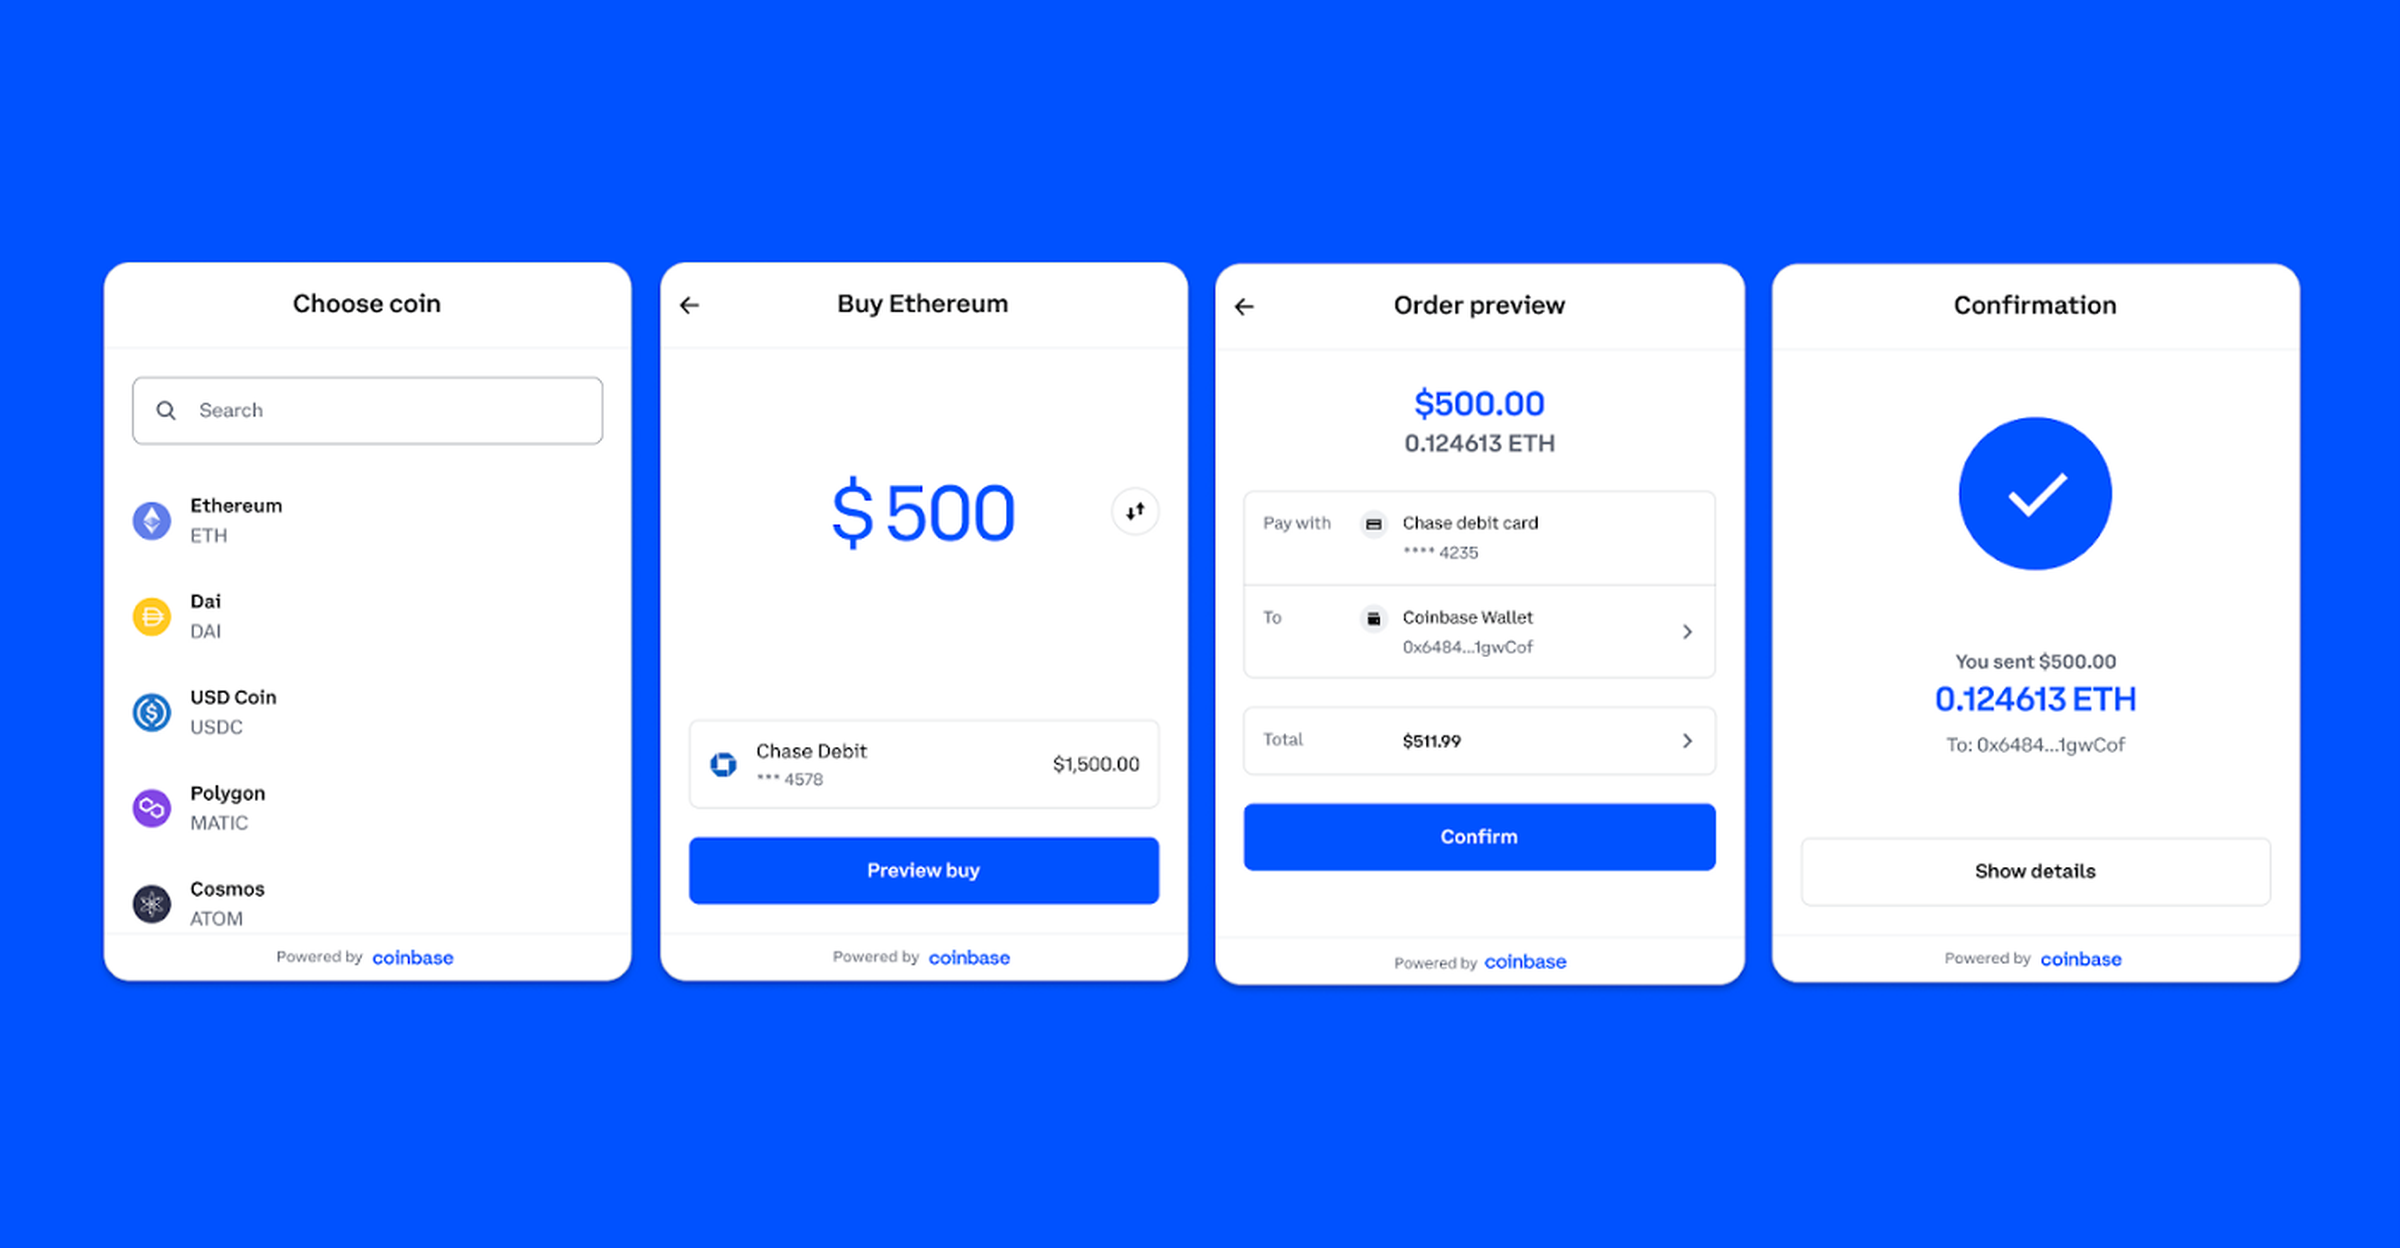 You can use Coinbase Pay to purchase and transfer crypto directly to your wallet.